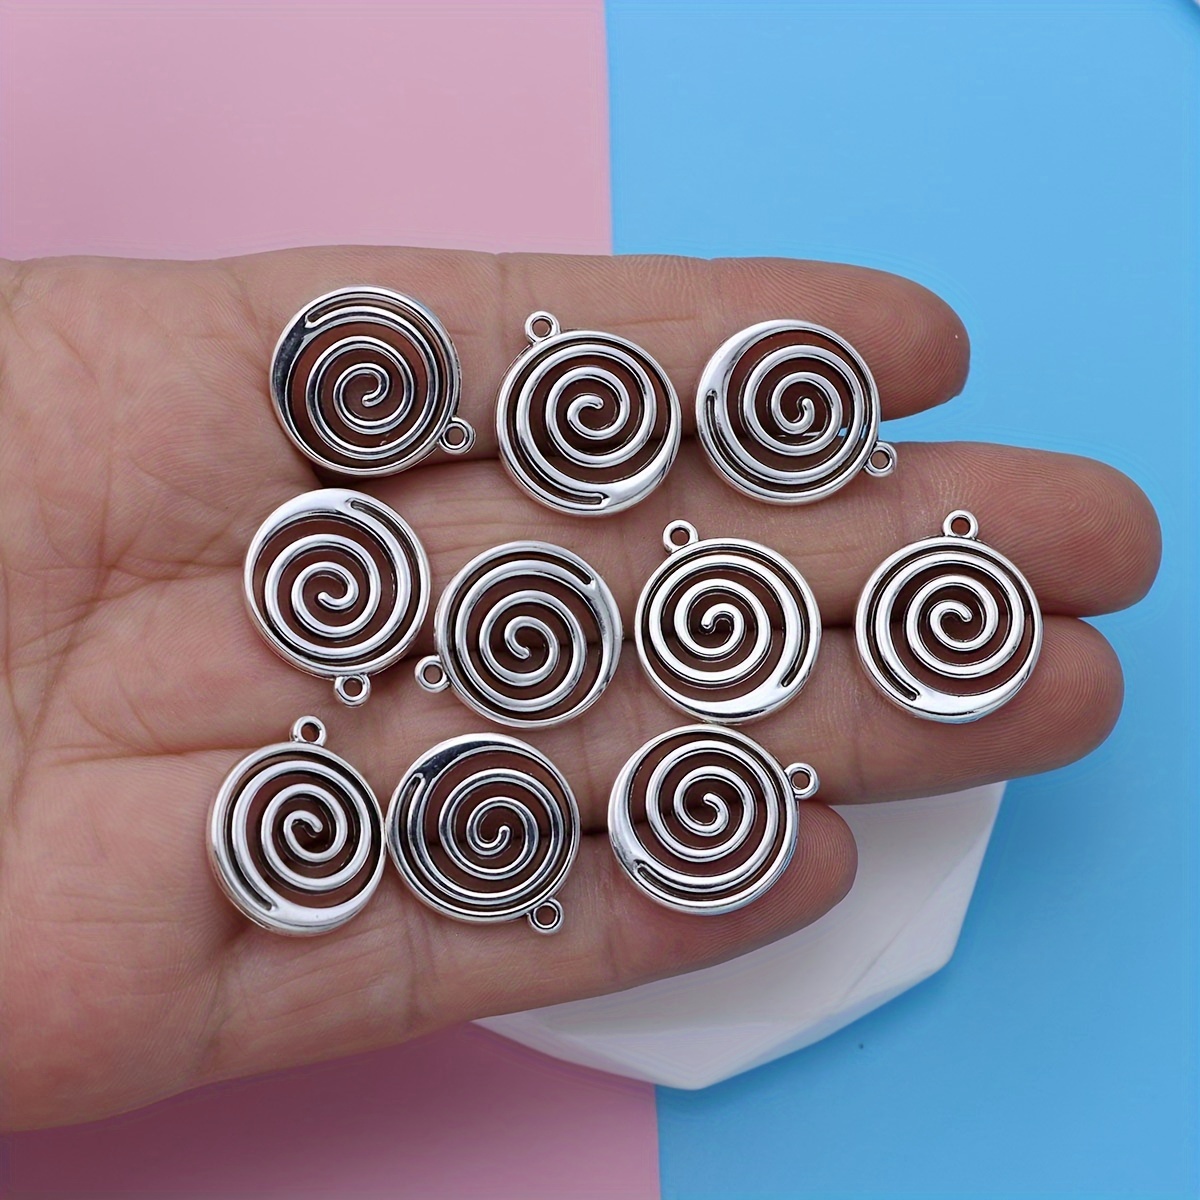 

20x17mm Silver Color Round Vortex Carved Charms Spiral Swirl Pendant For Necklaces Jewelry Findings Accessories